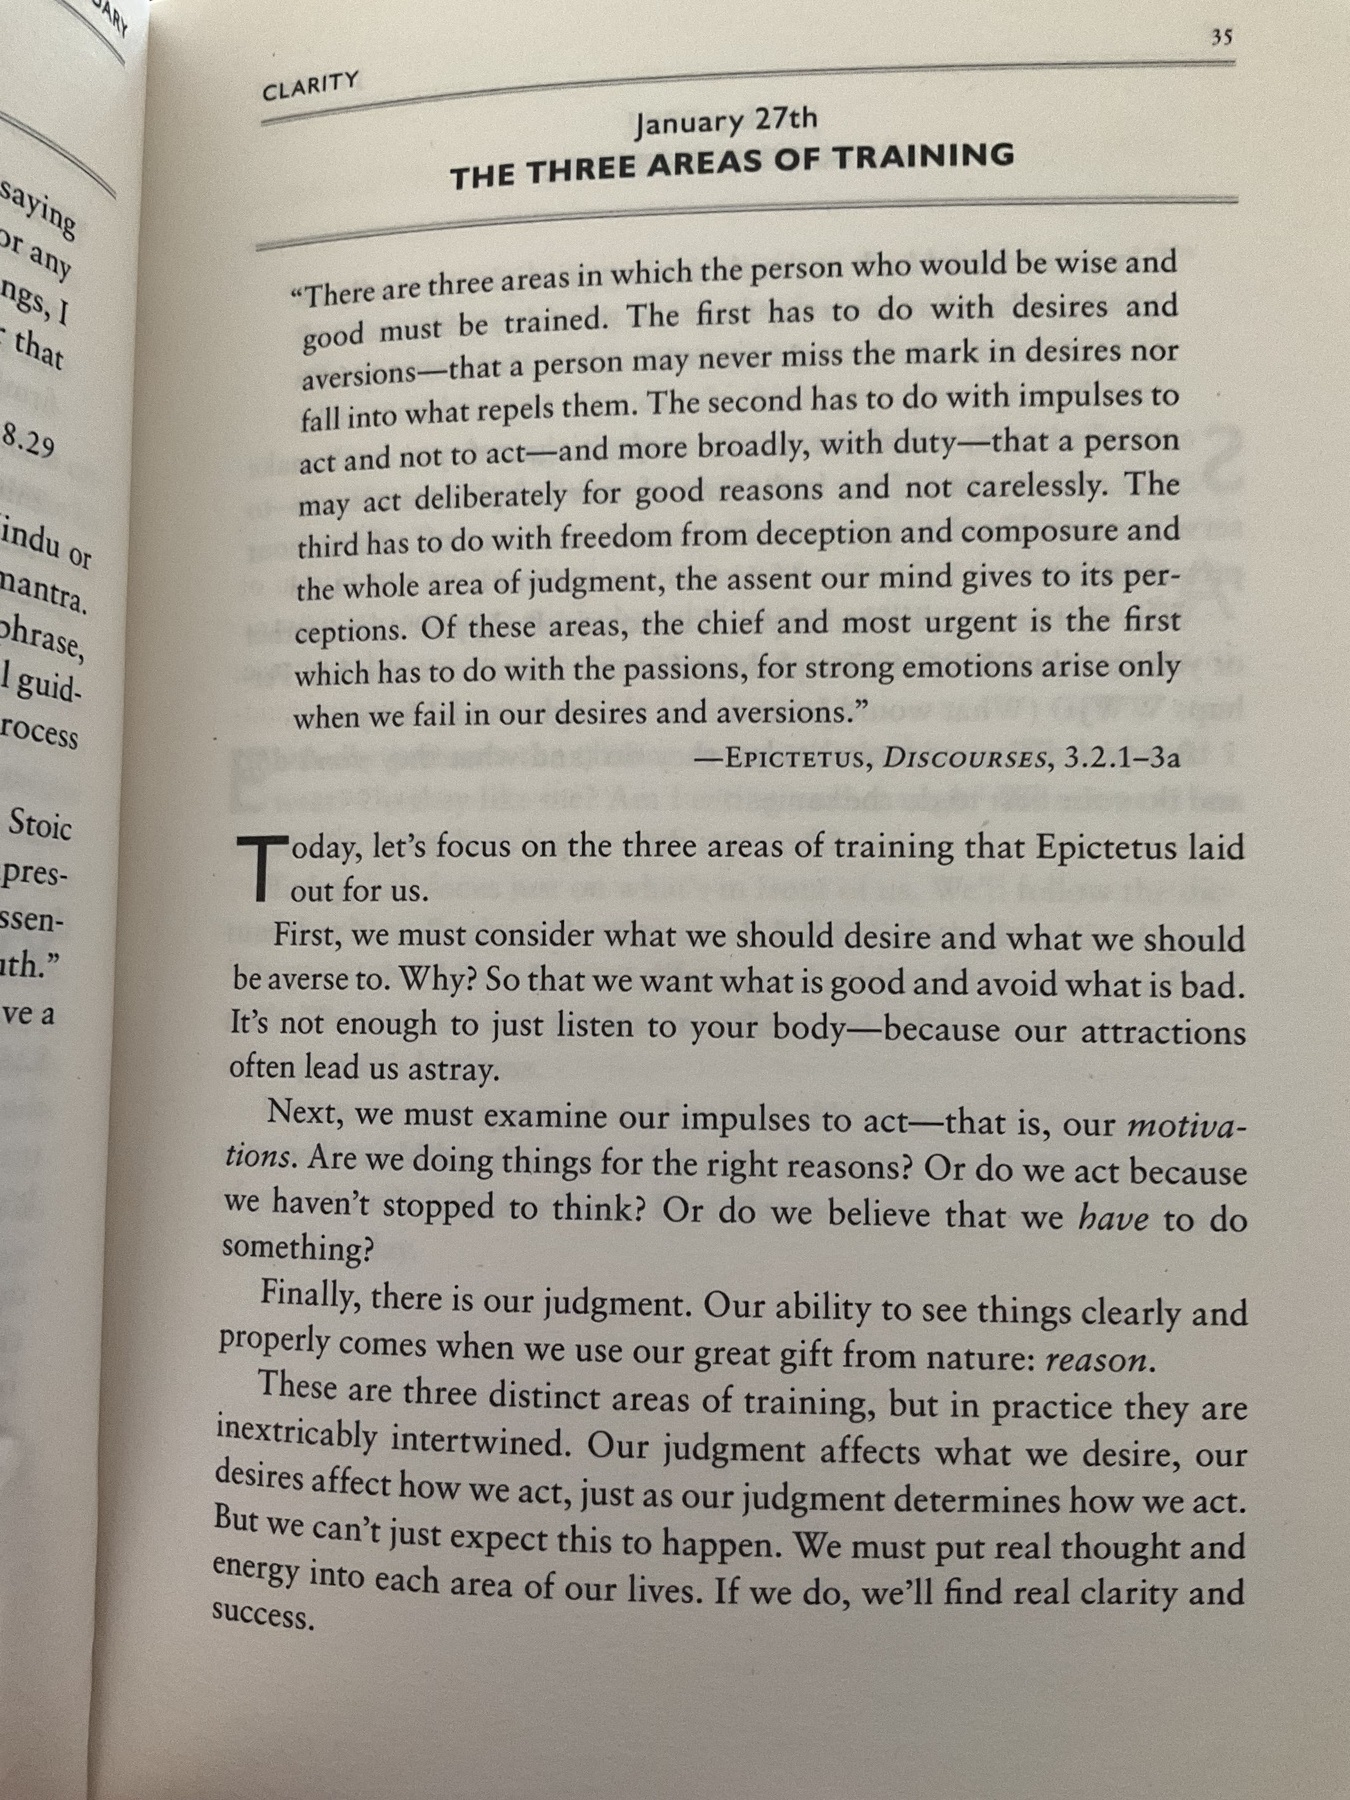 The Daily Stoic … The Daily Quote … Page 35